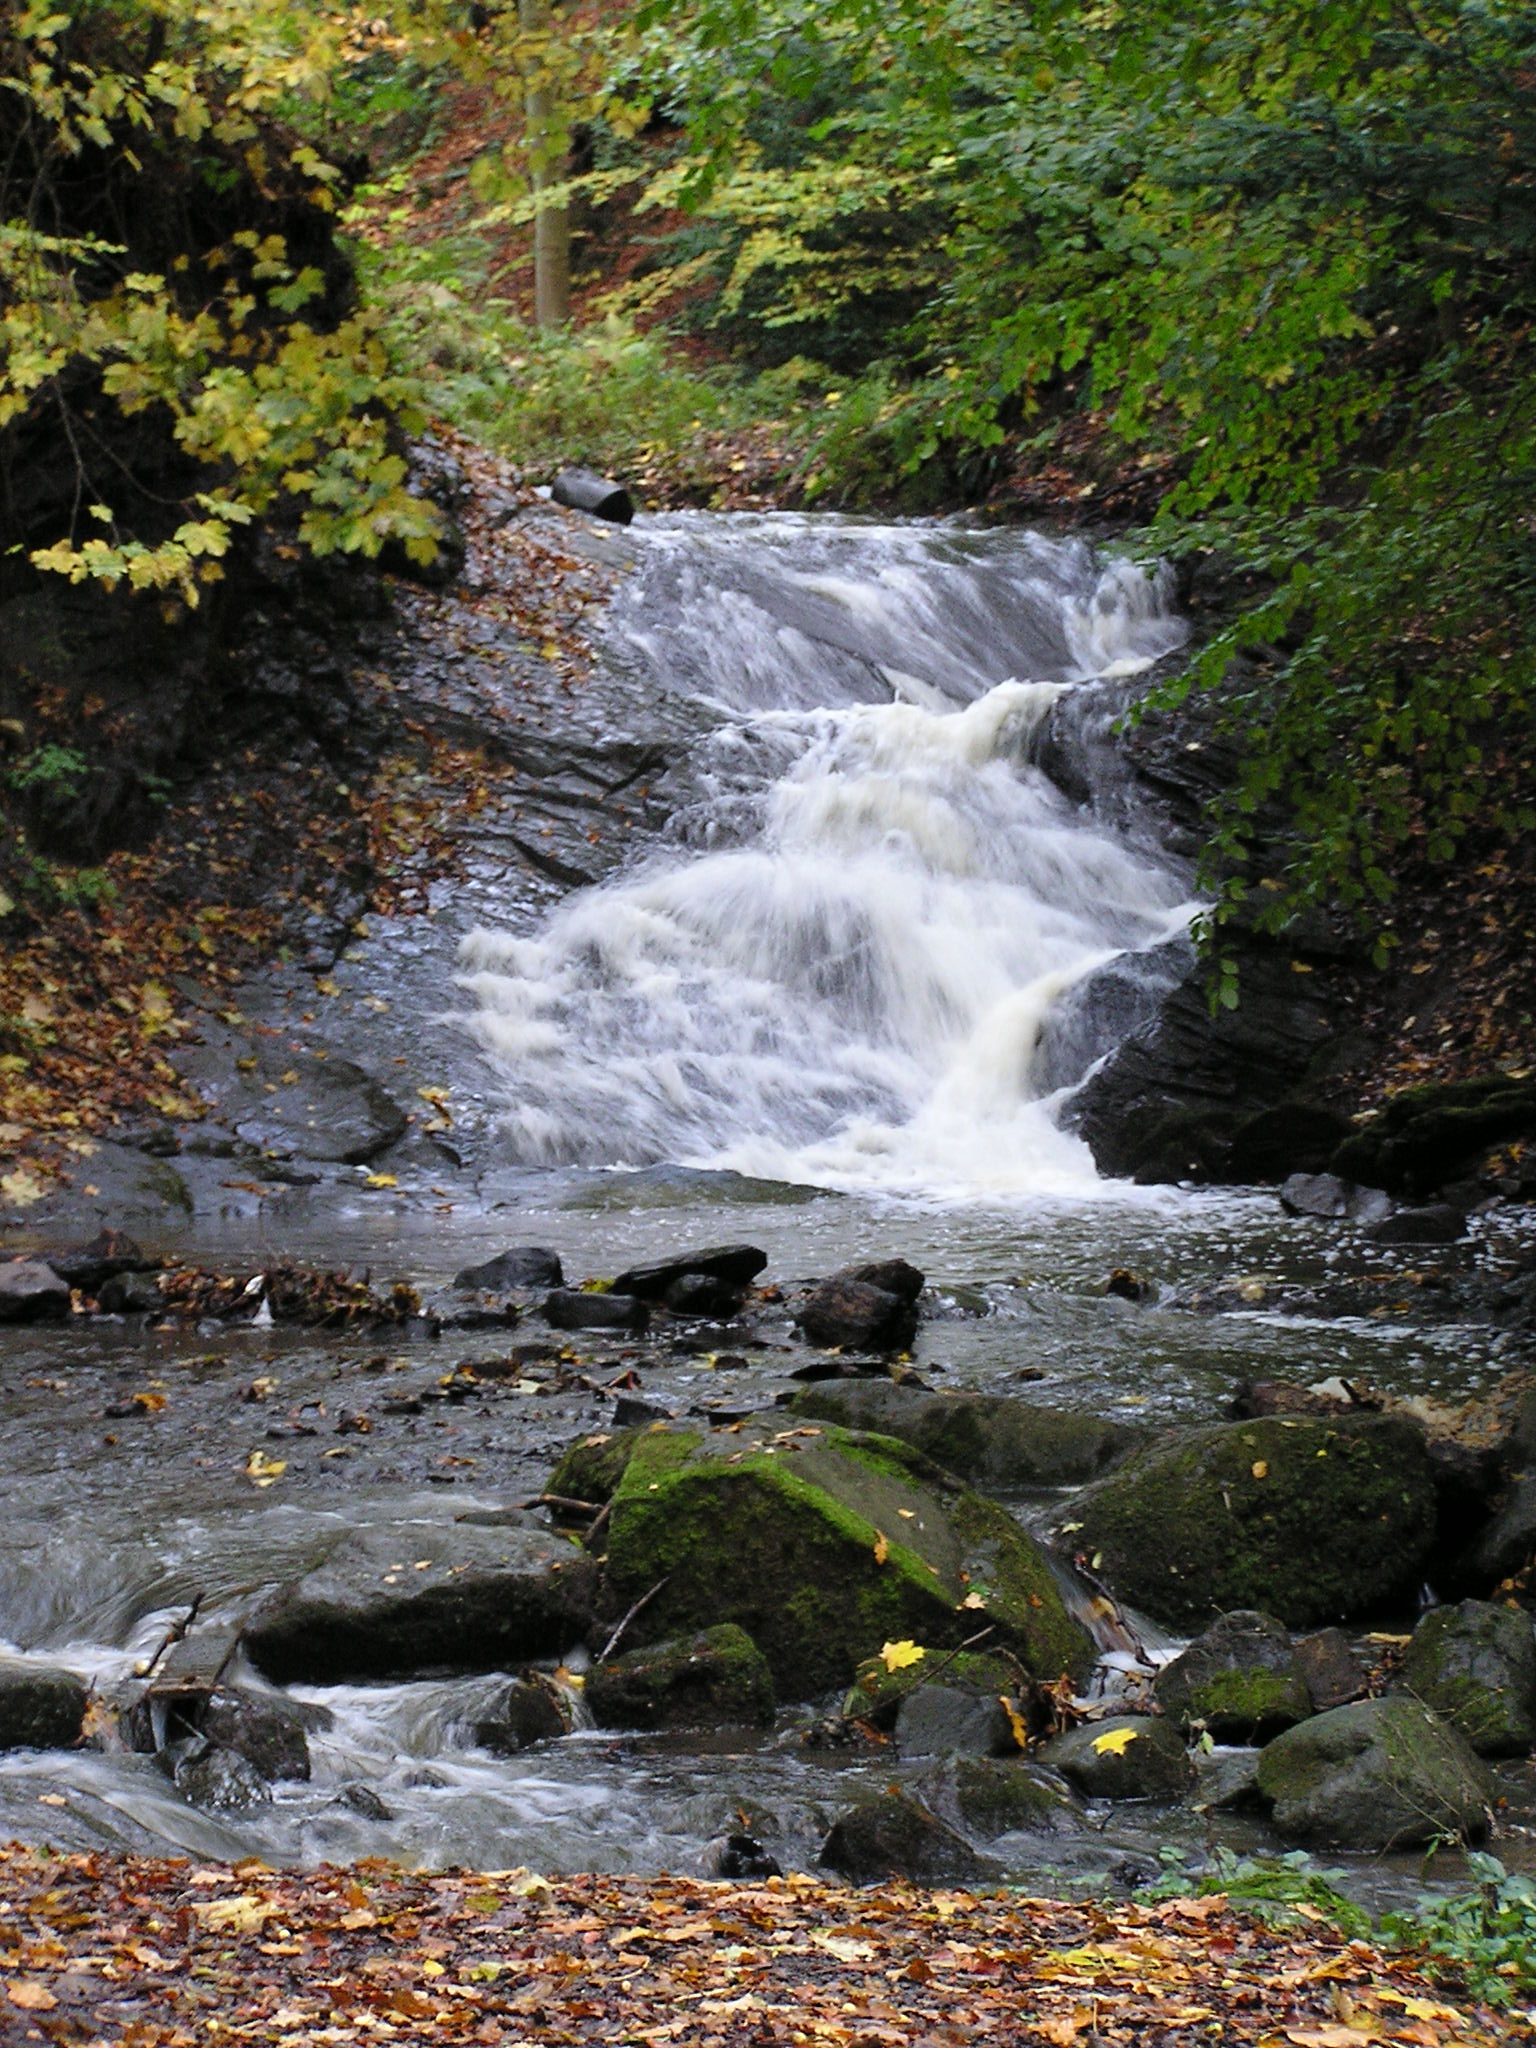 Rushing stream surrounded by rocks, moss and lush green trees